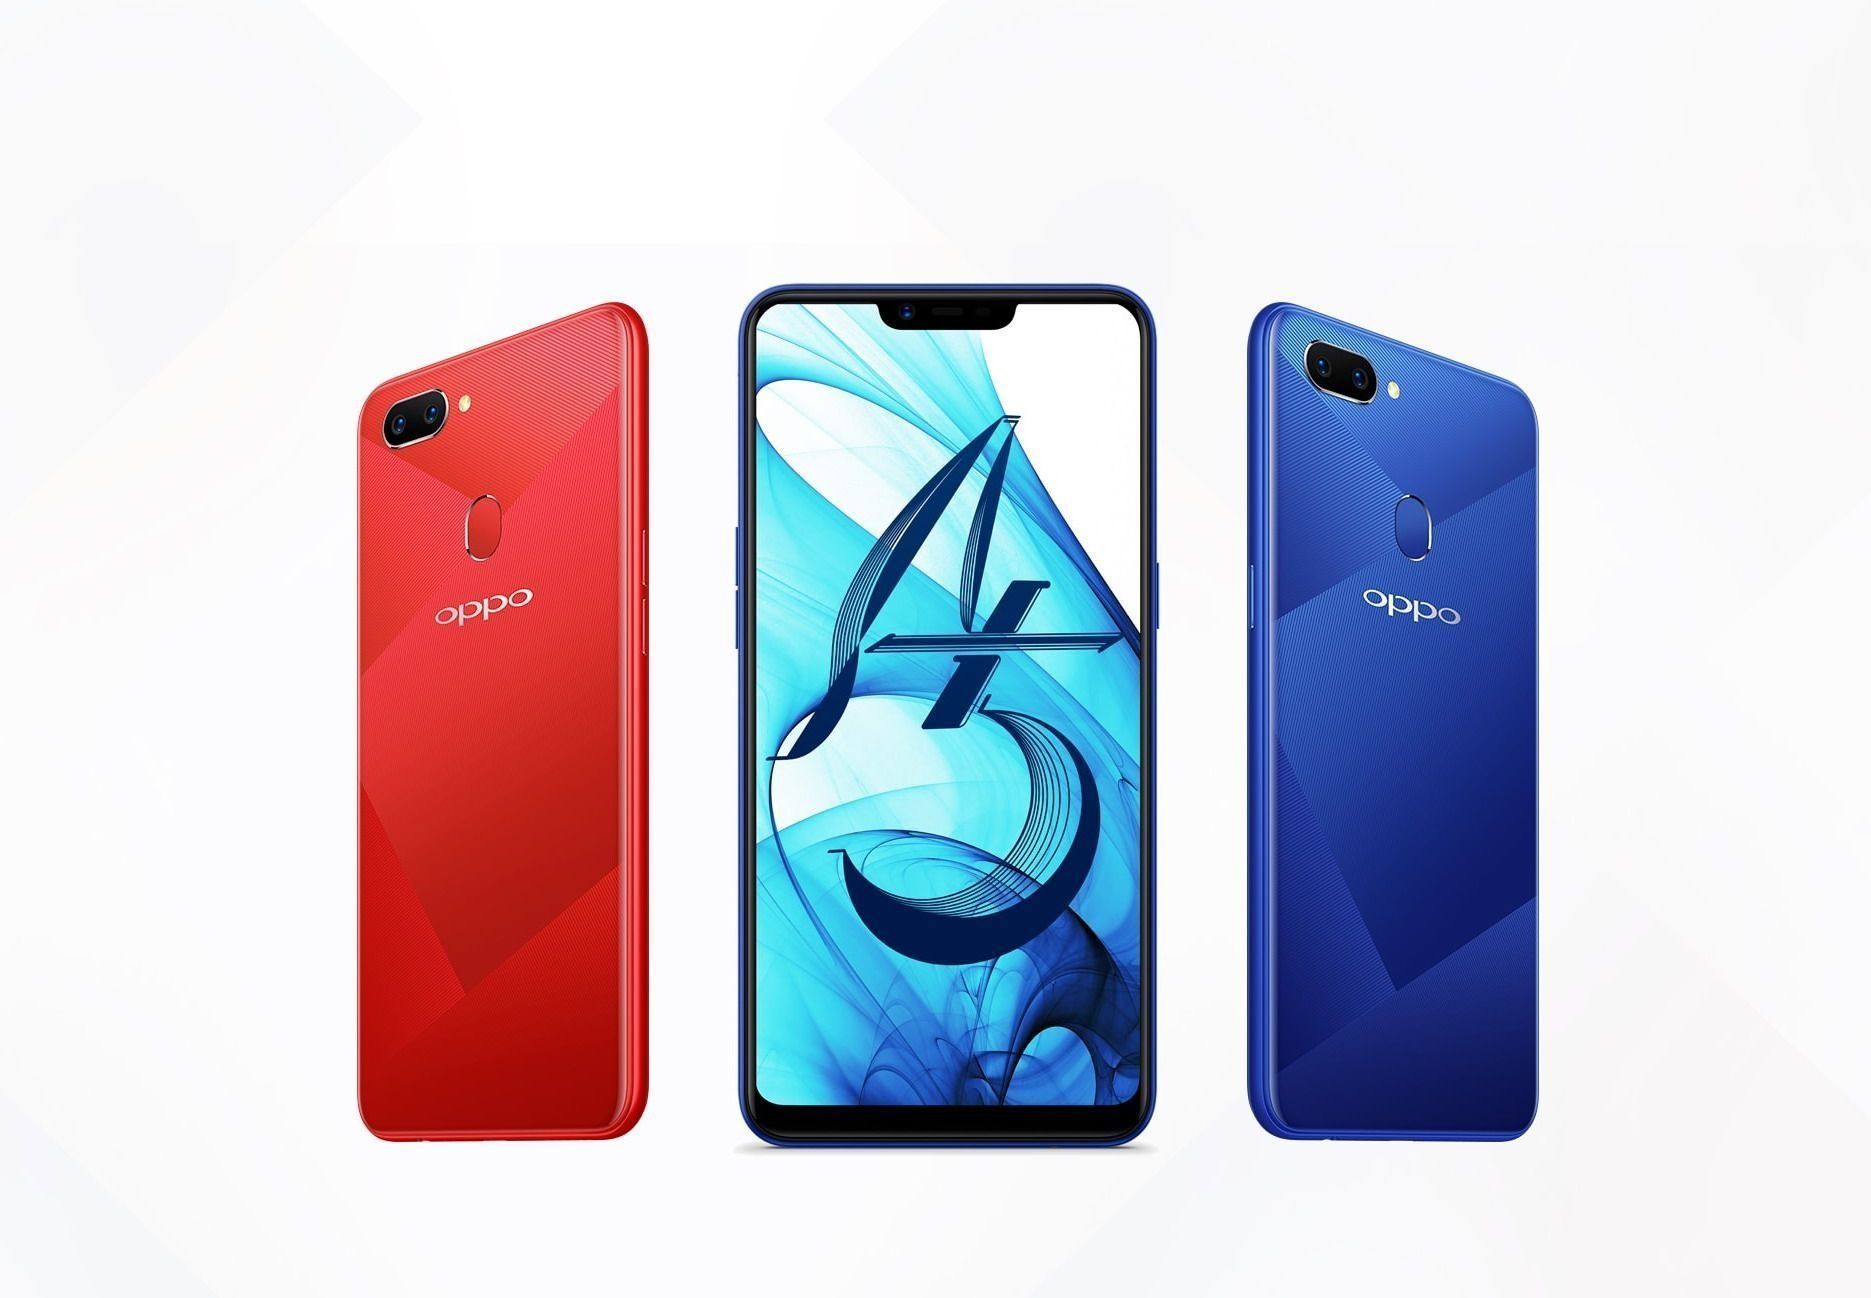 Oppo A5 4/32 Gb smartphone - advantages and disadvantages